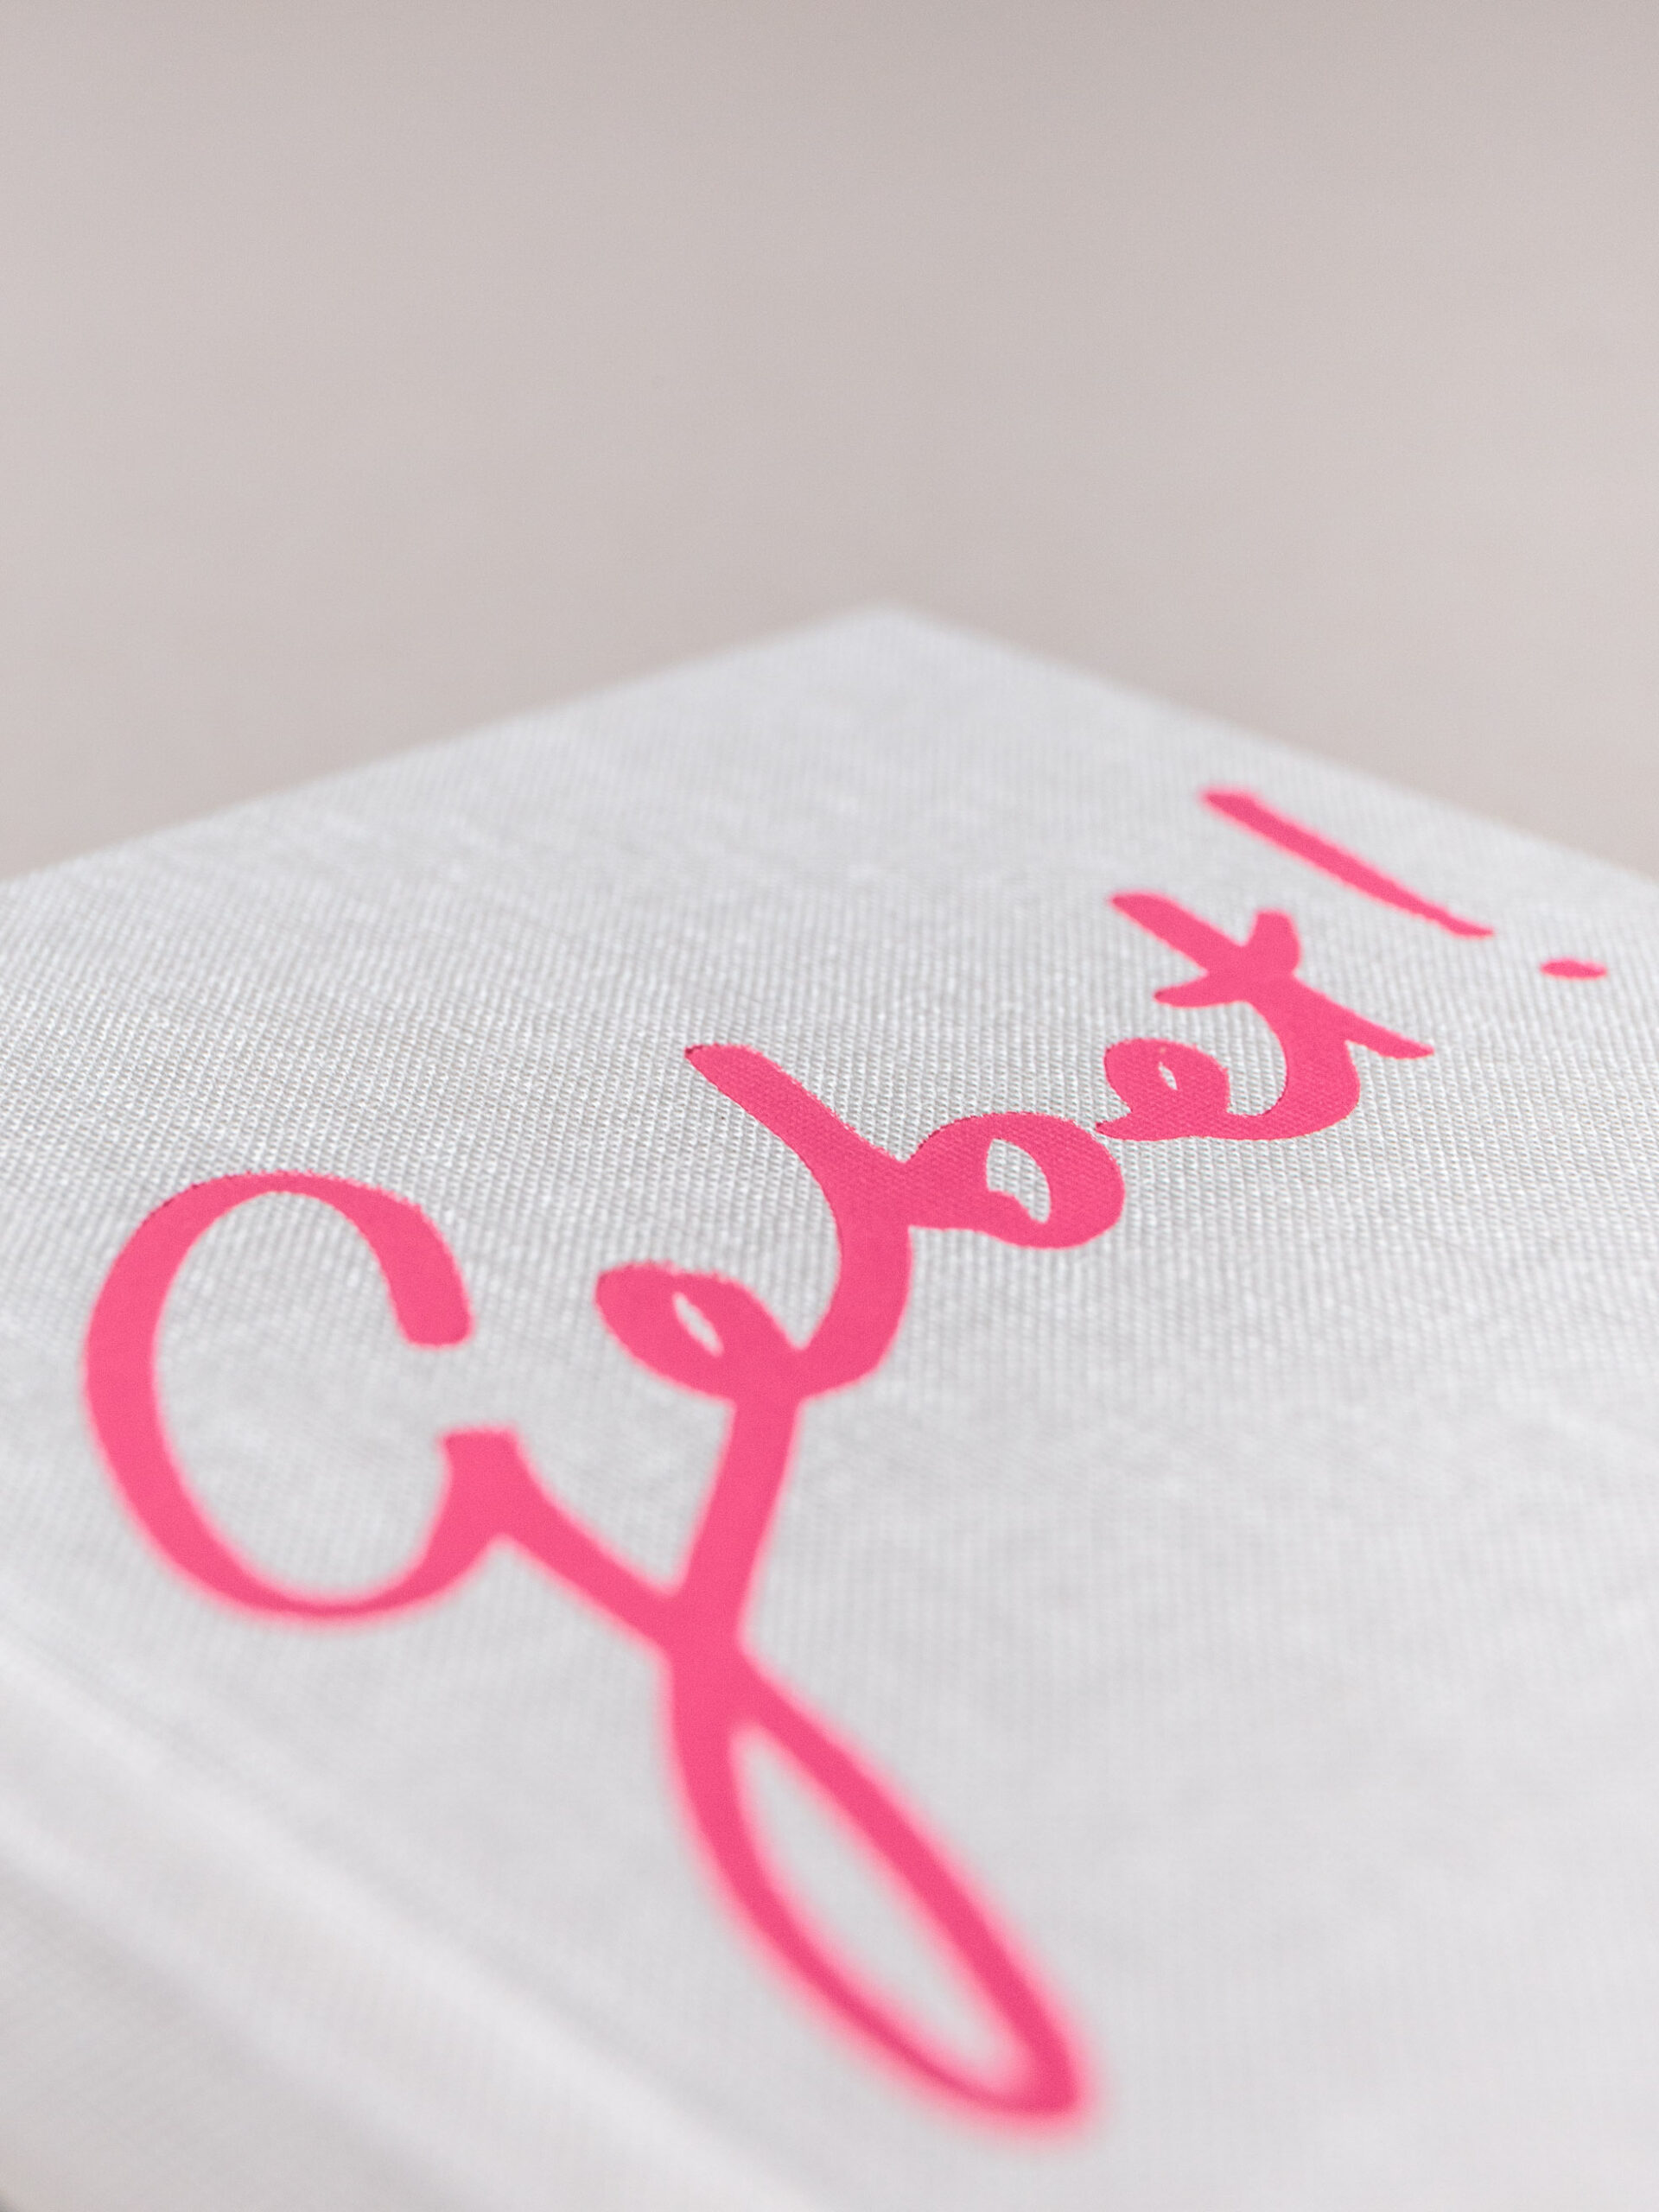 Book cover – Spine embossing and a warm grey linen binding on the German prayer book “Gebet!”. Designed by Johannes Pistorius.